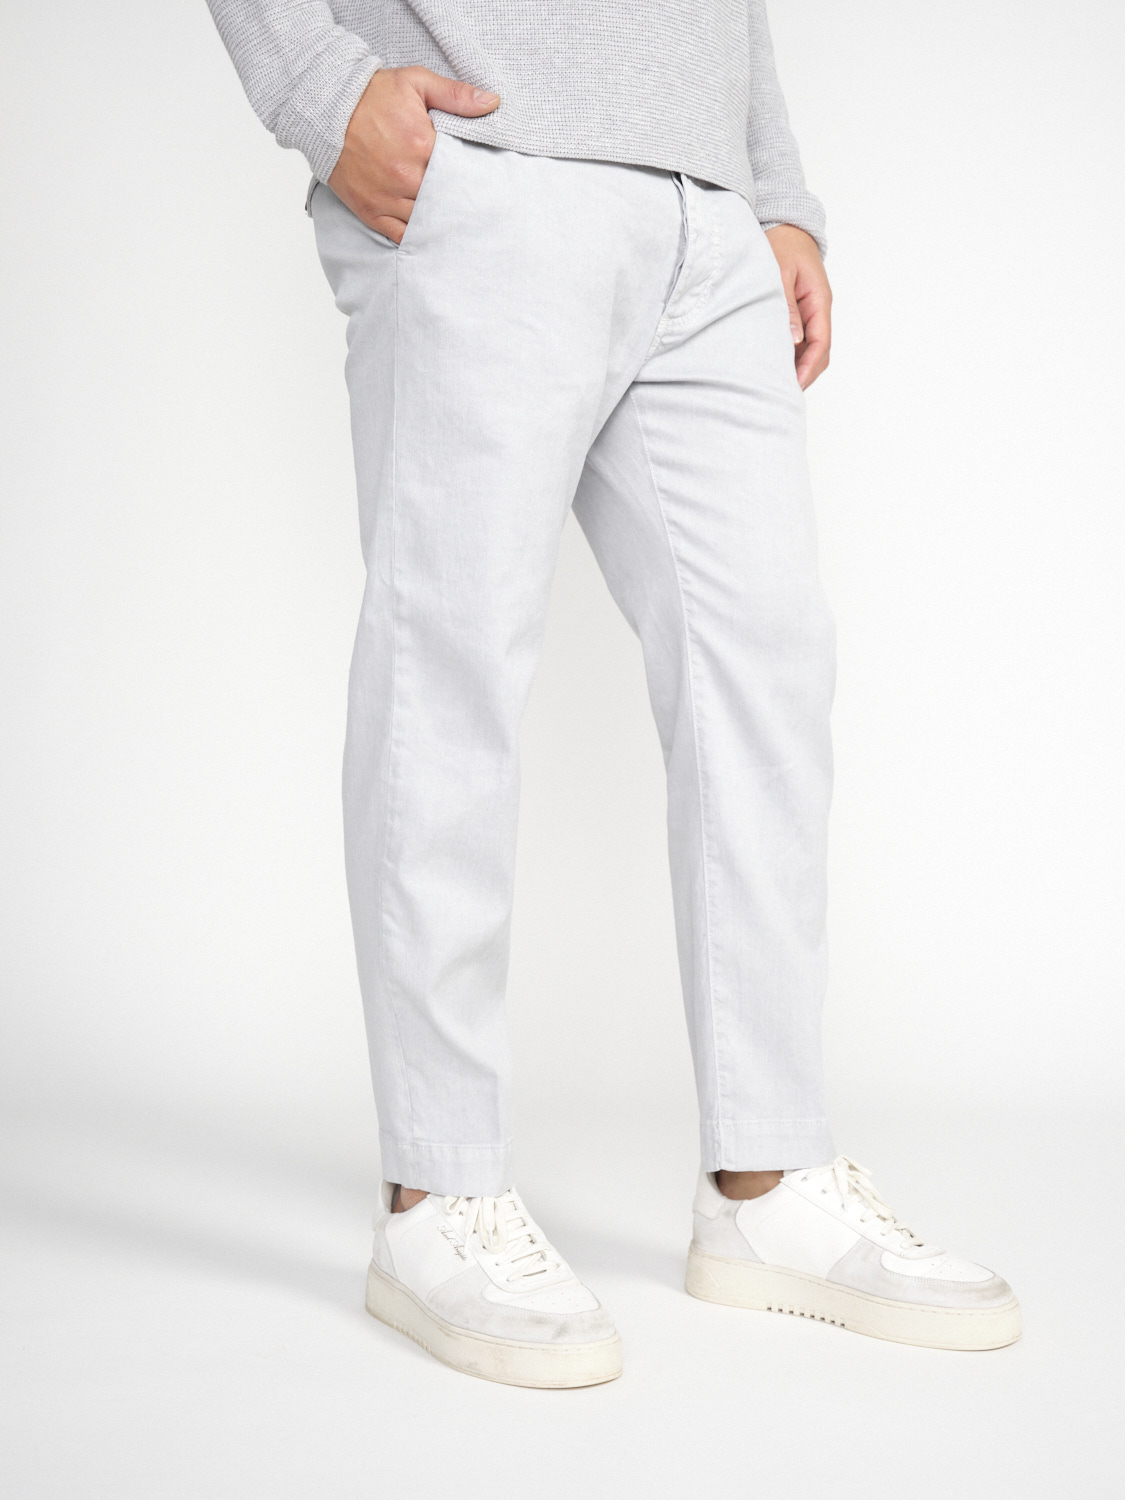 nine in the morning Tim – Stretchy linen-cotton mix jeans  hellgrau 33